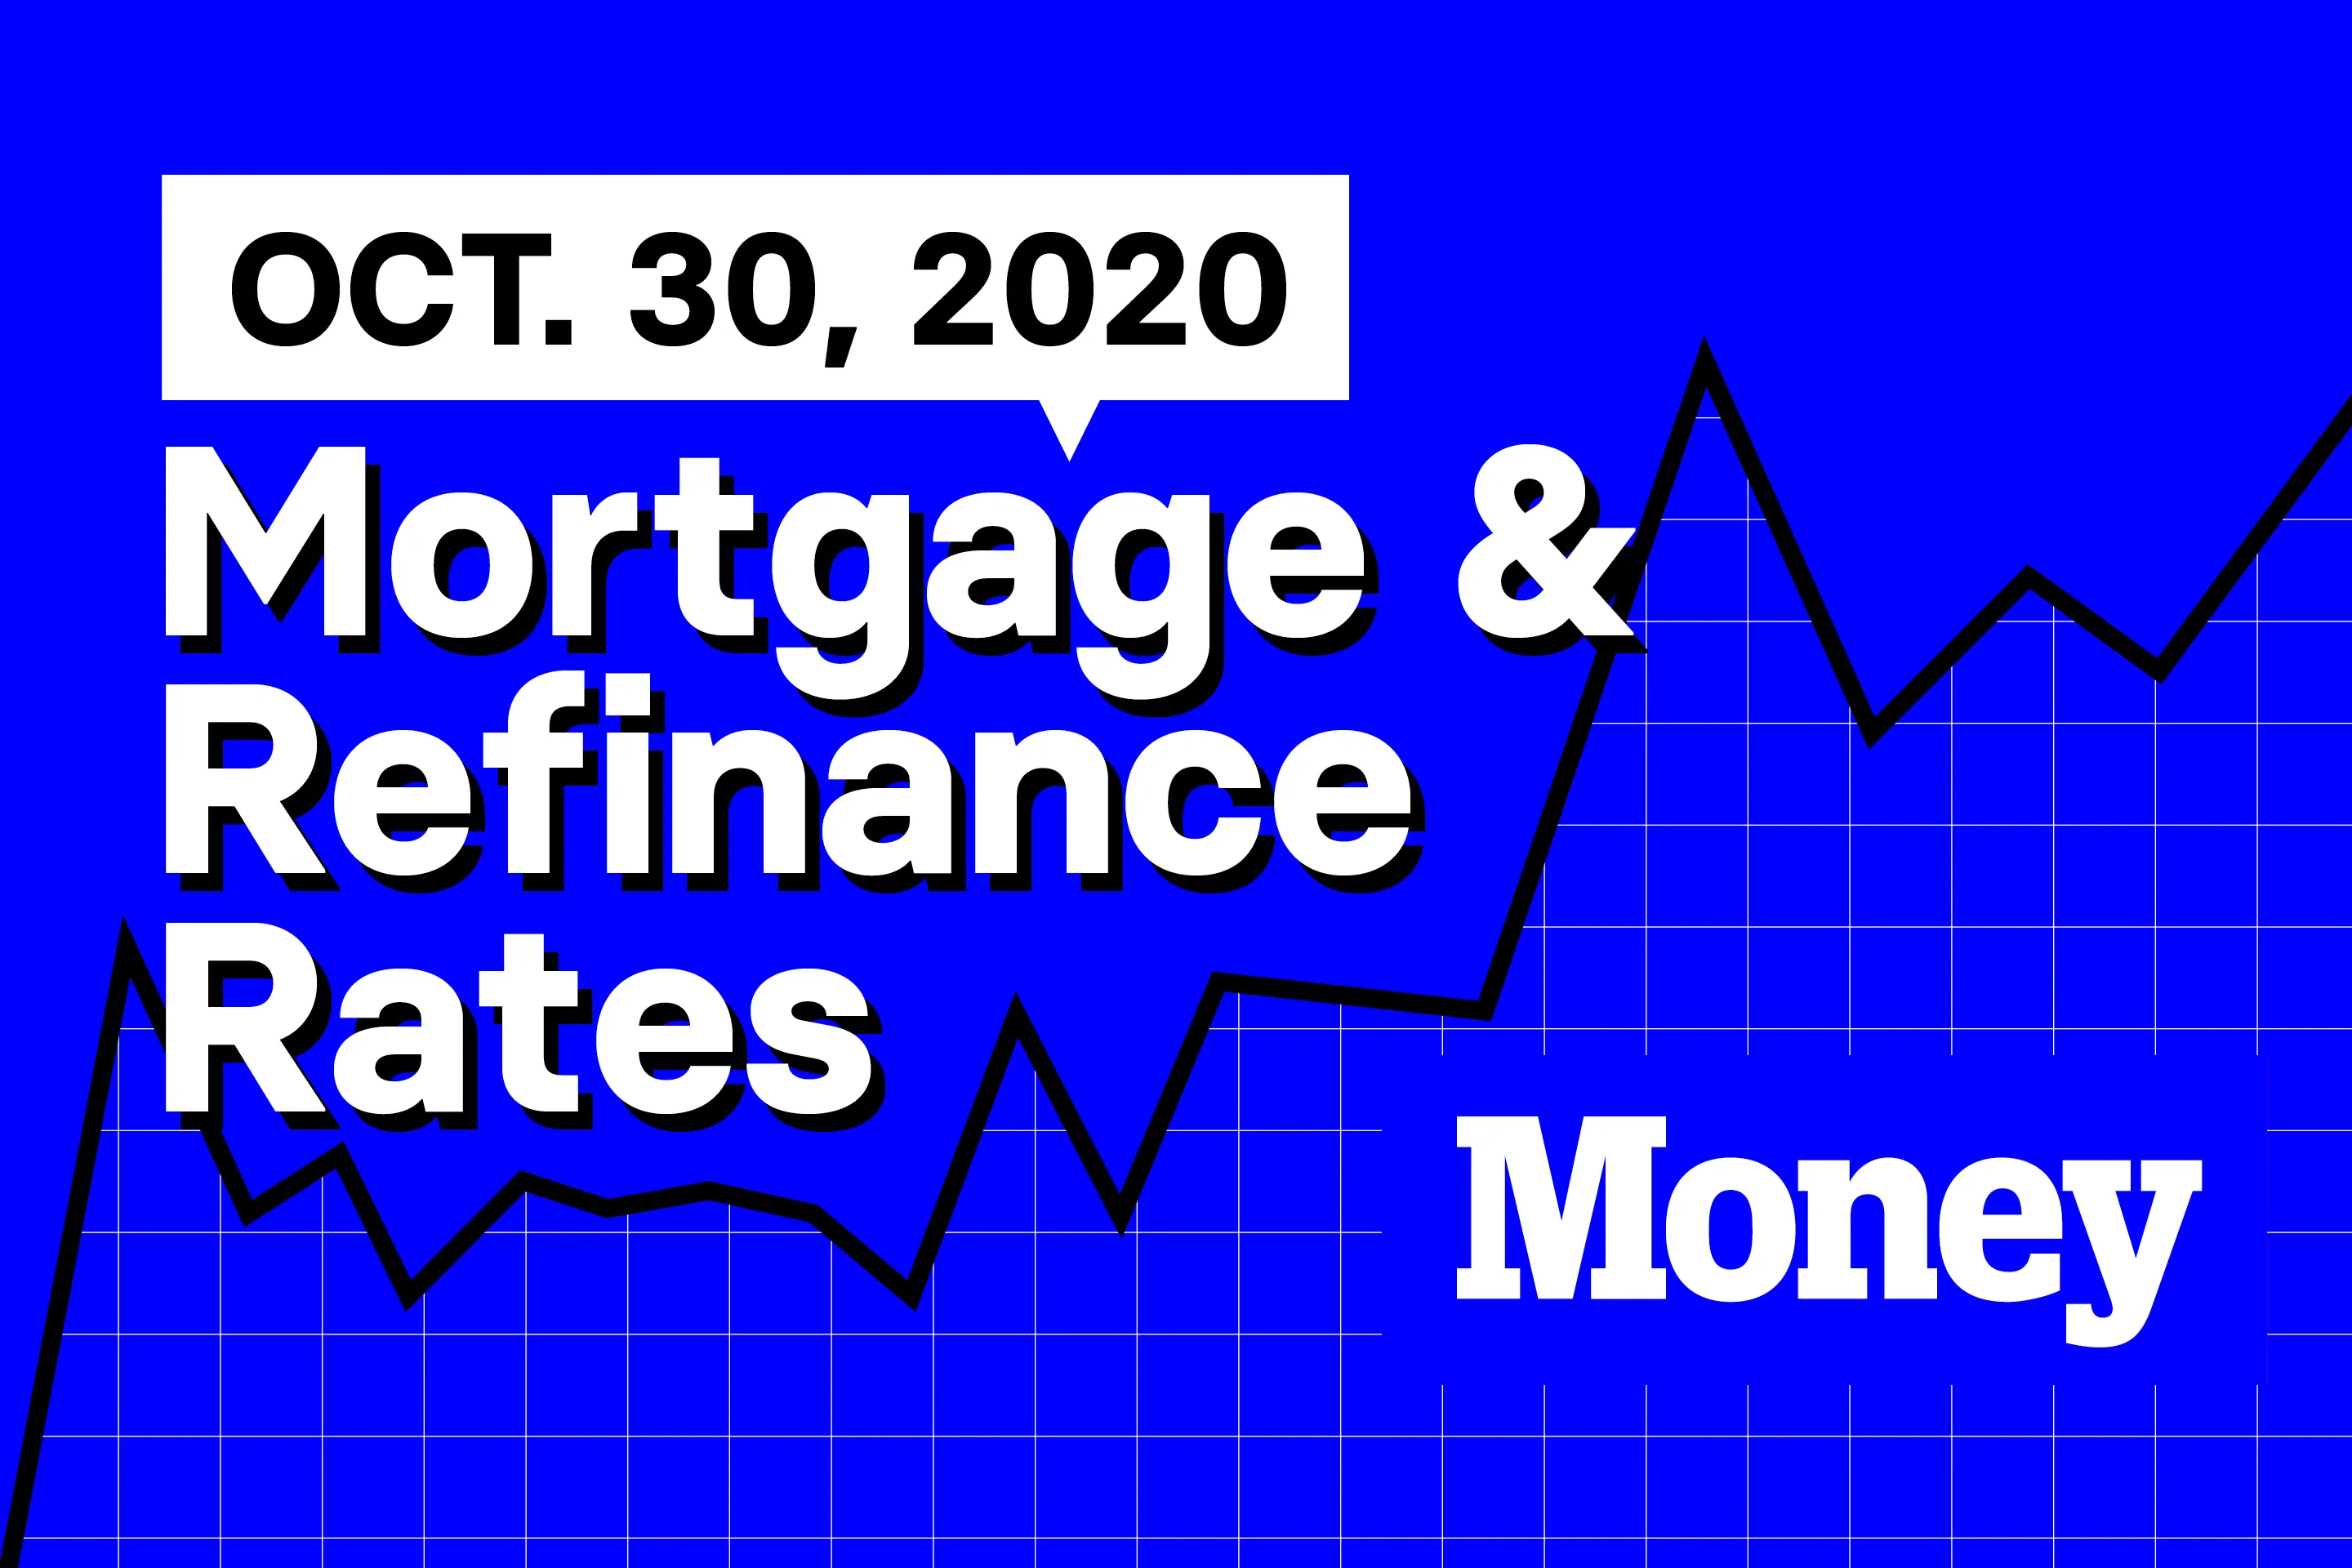 Here Are Today's Best Mortgage & Refinance Rates for October 30, 2020